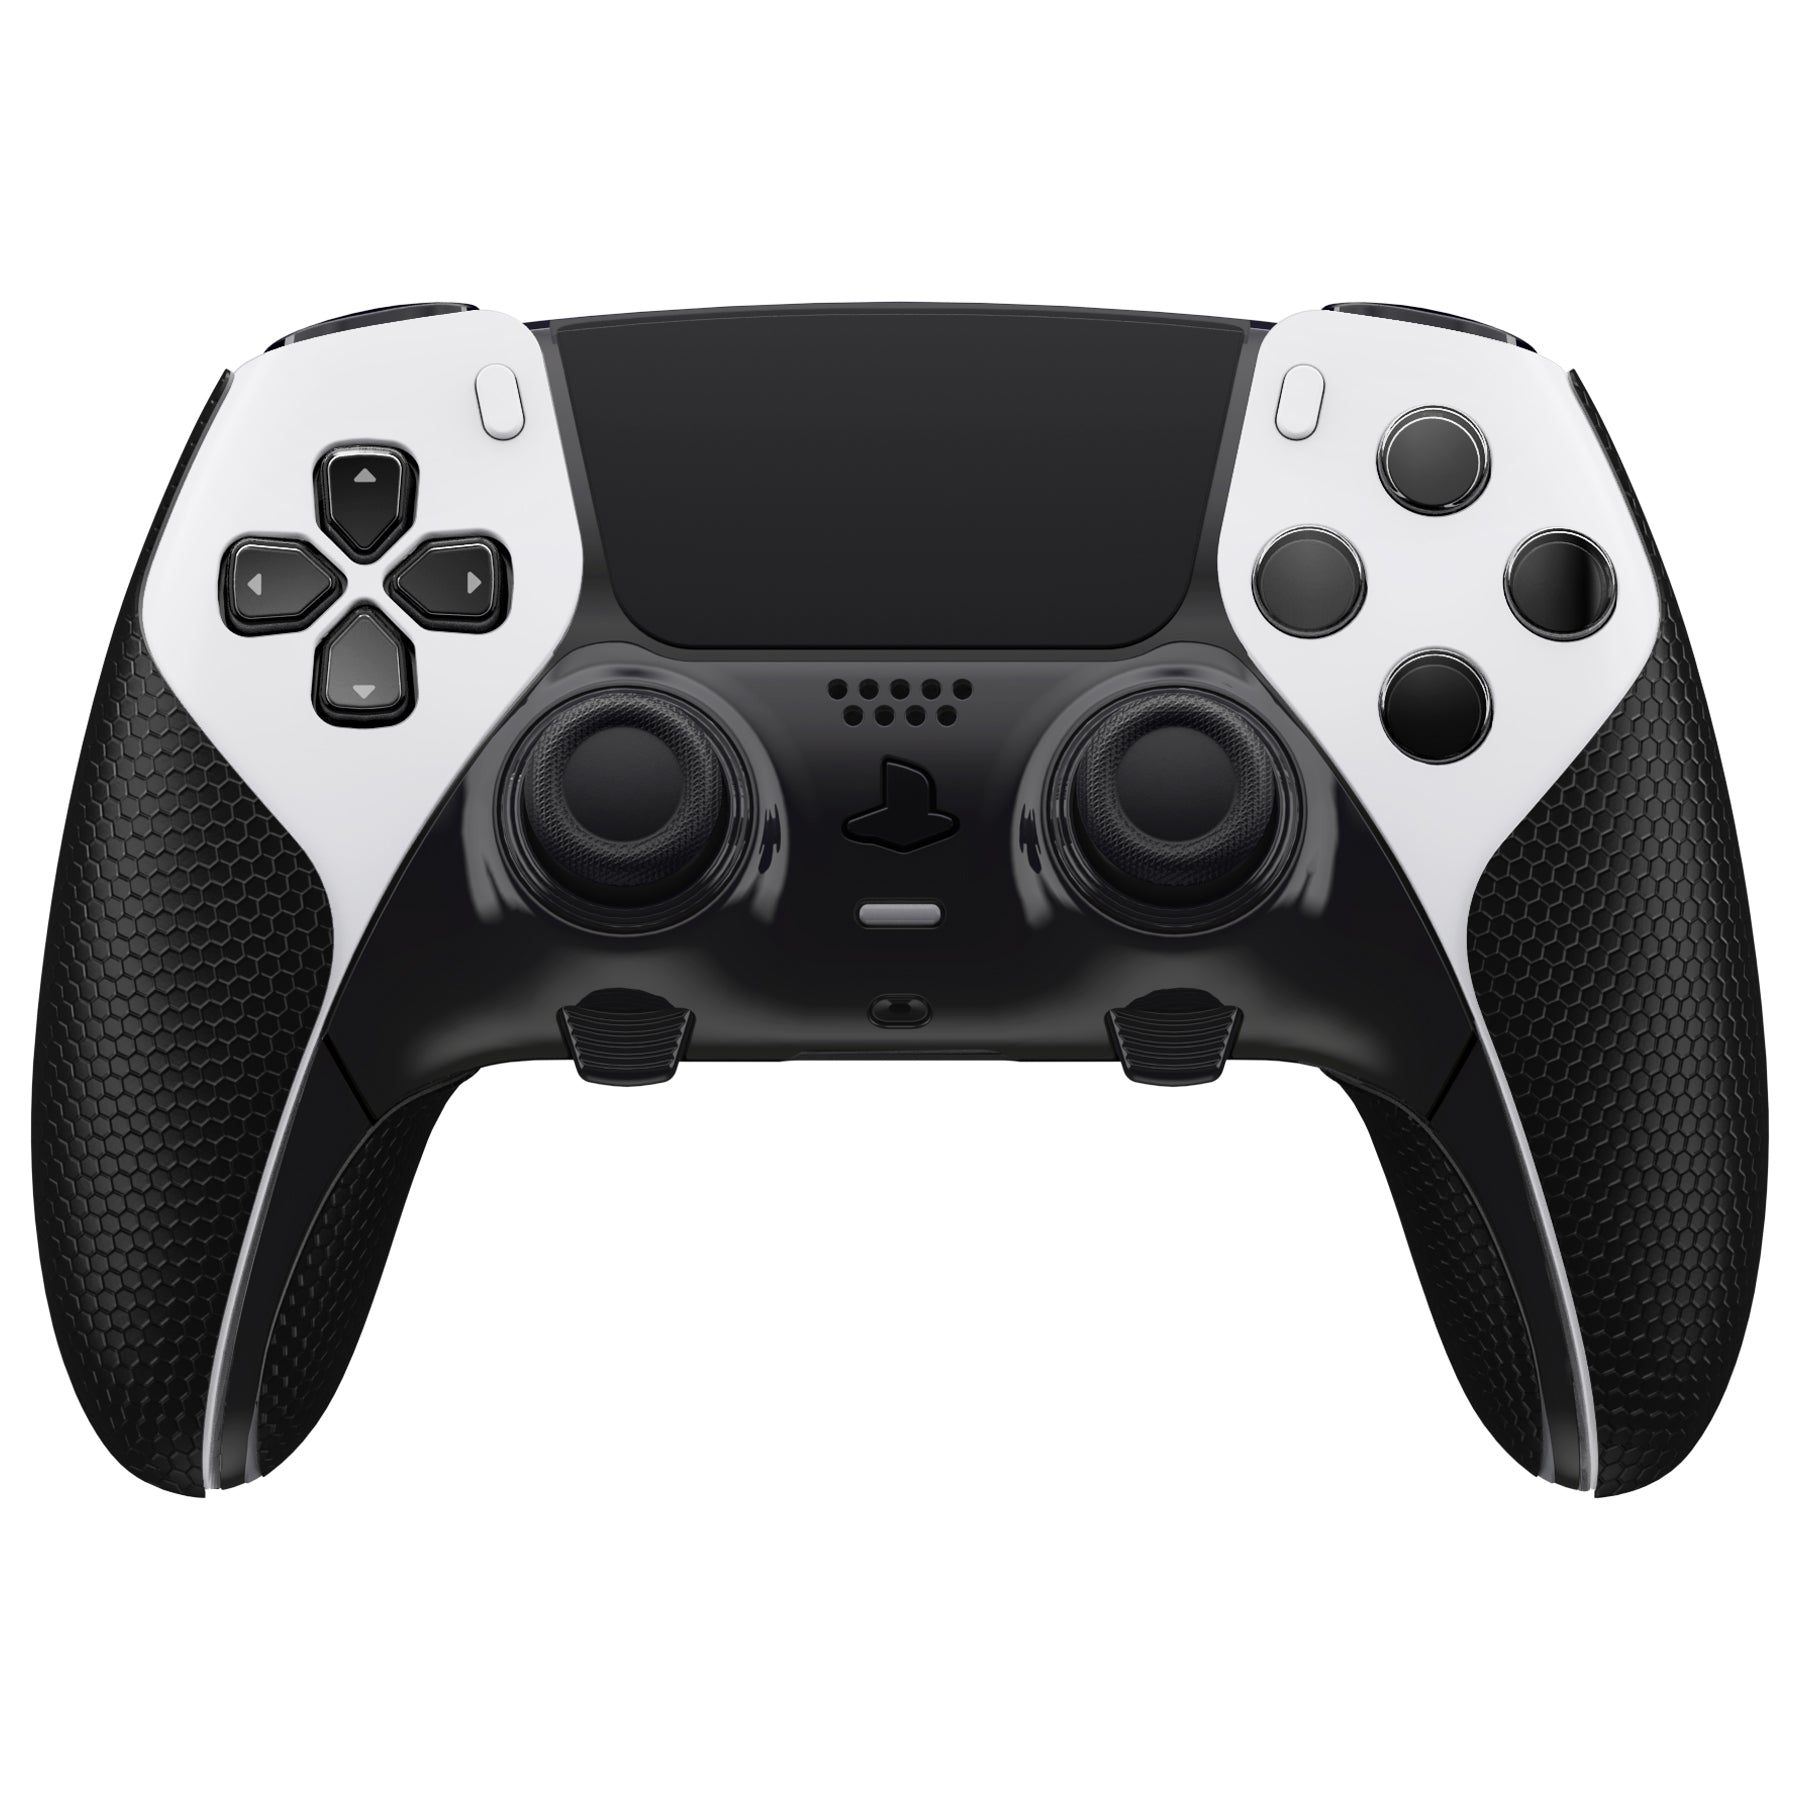 PlayVital Anti-Skid Sweat-Absorbent Controller Grip for ps5 Edge Wireless Controller, Professional Textured Soft PU Handle Grips Anti Sweat Protector for ps5 Edge Controller - Black - PFPJ112 PlayVital